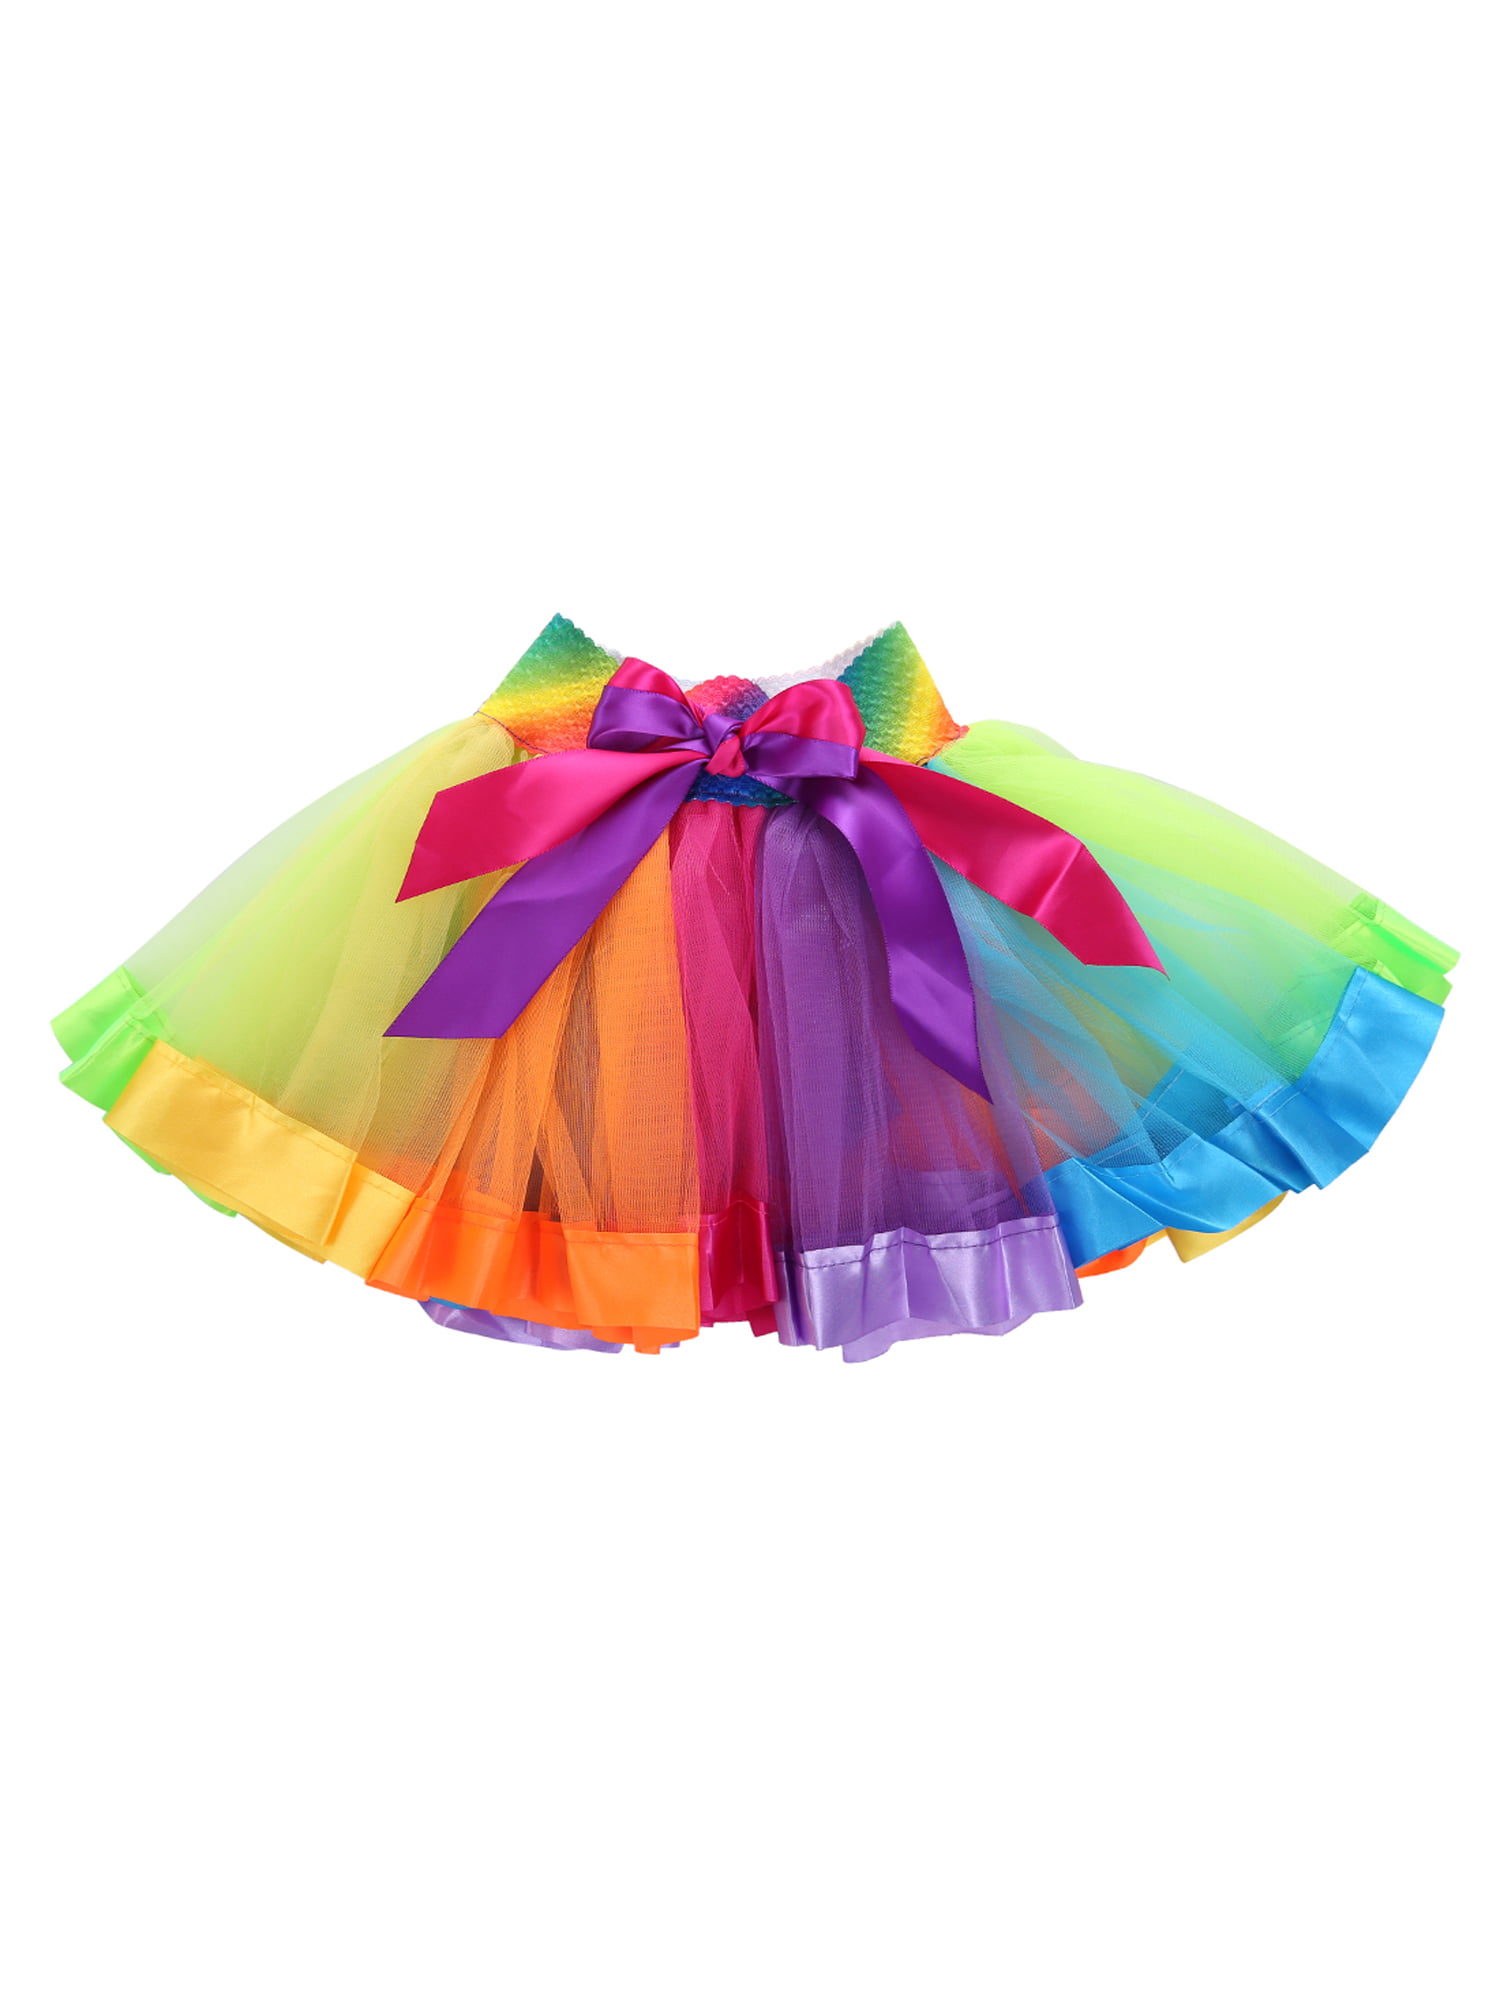 BGFKS Tulle Rainbow Tutu Skirt for Newborn Baby Girls Photography Outfit Sets Baby Girls 1st Birthday